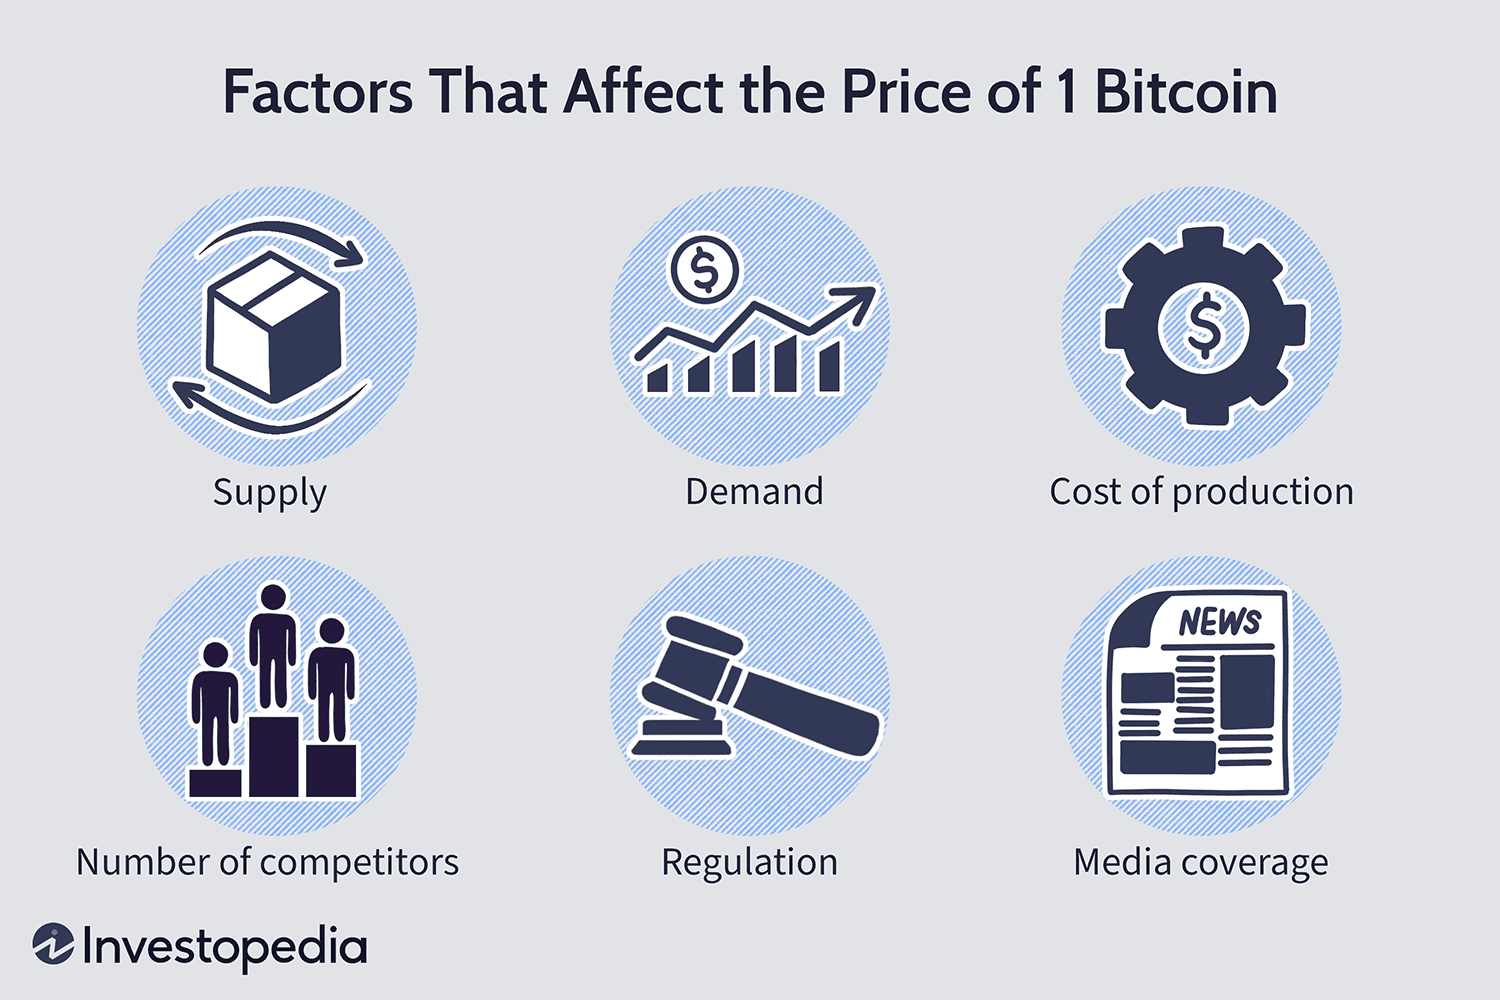 Why do crypto prices fluctuate so much?